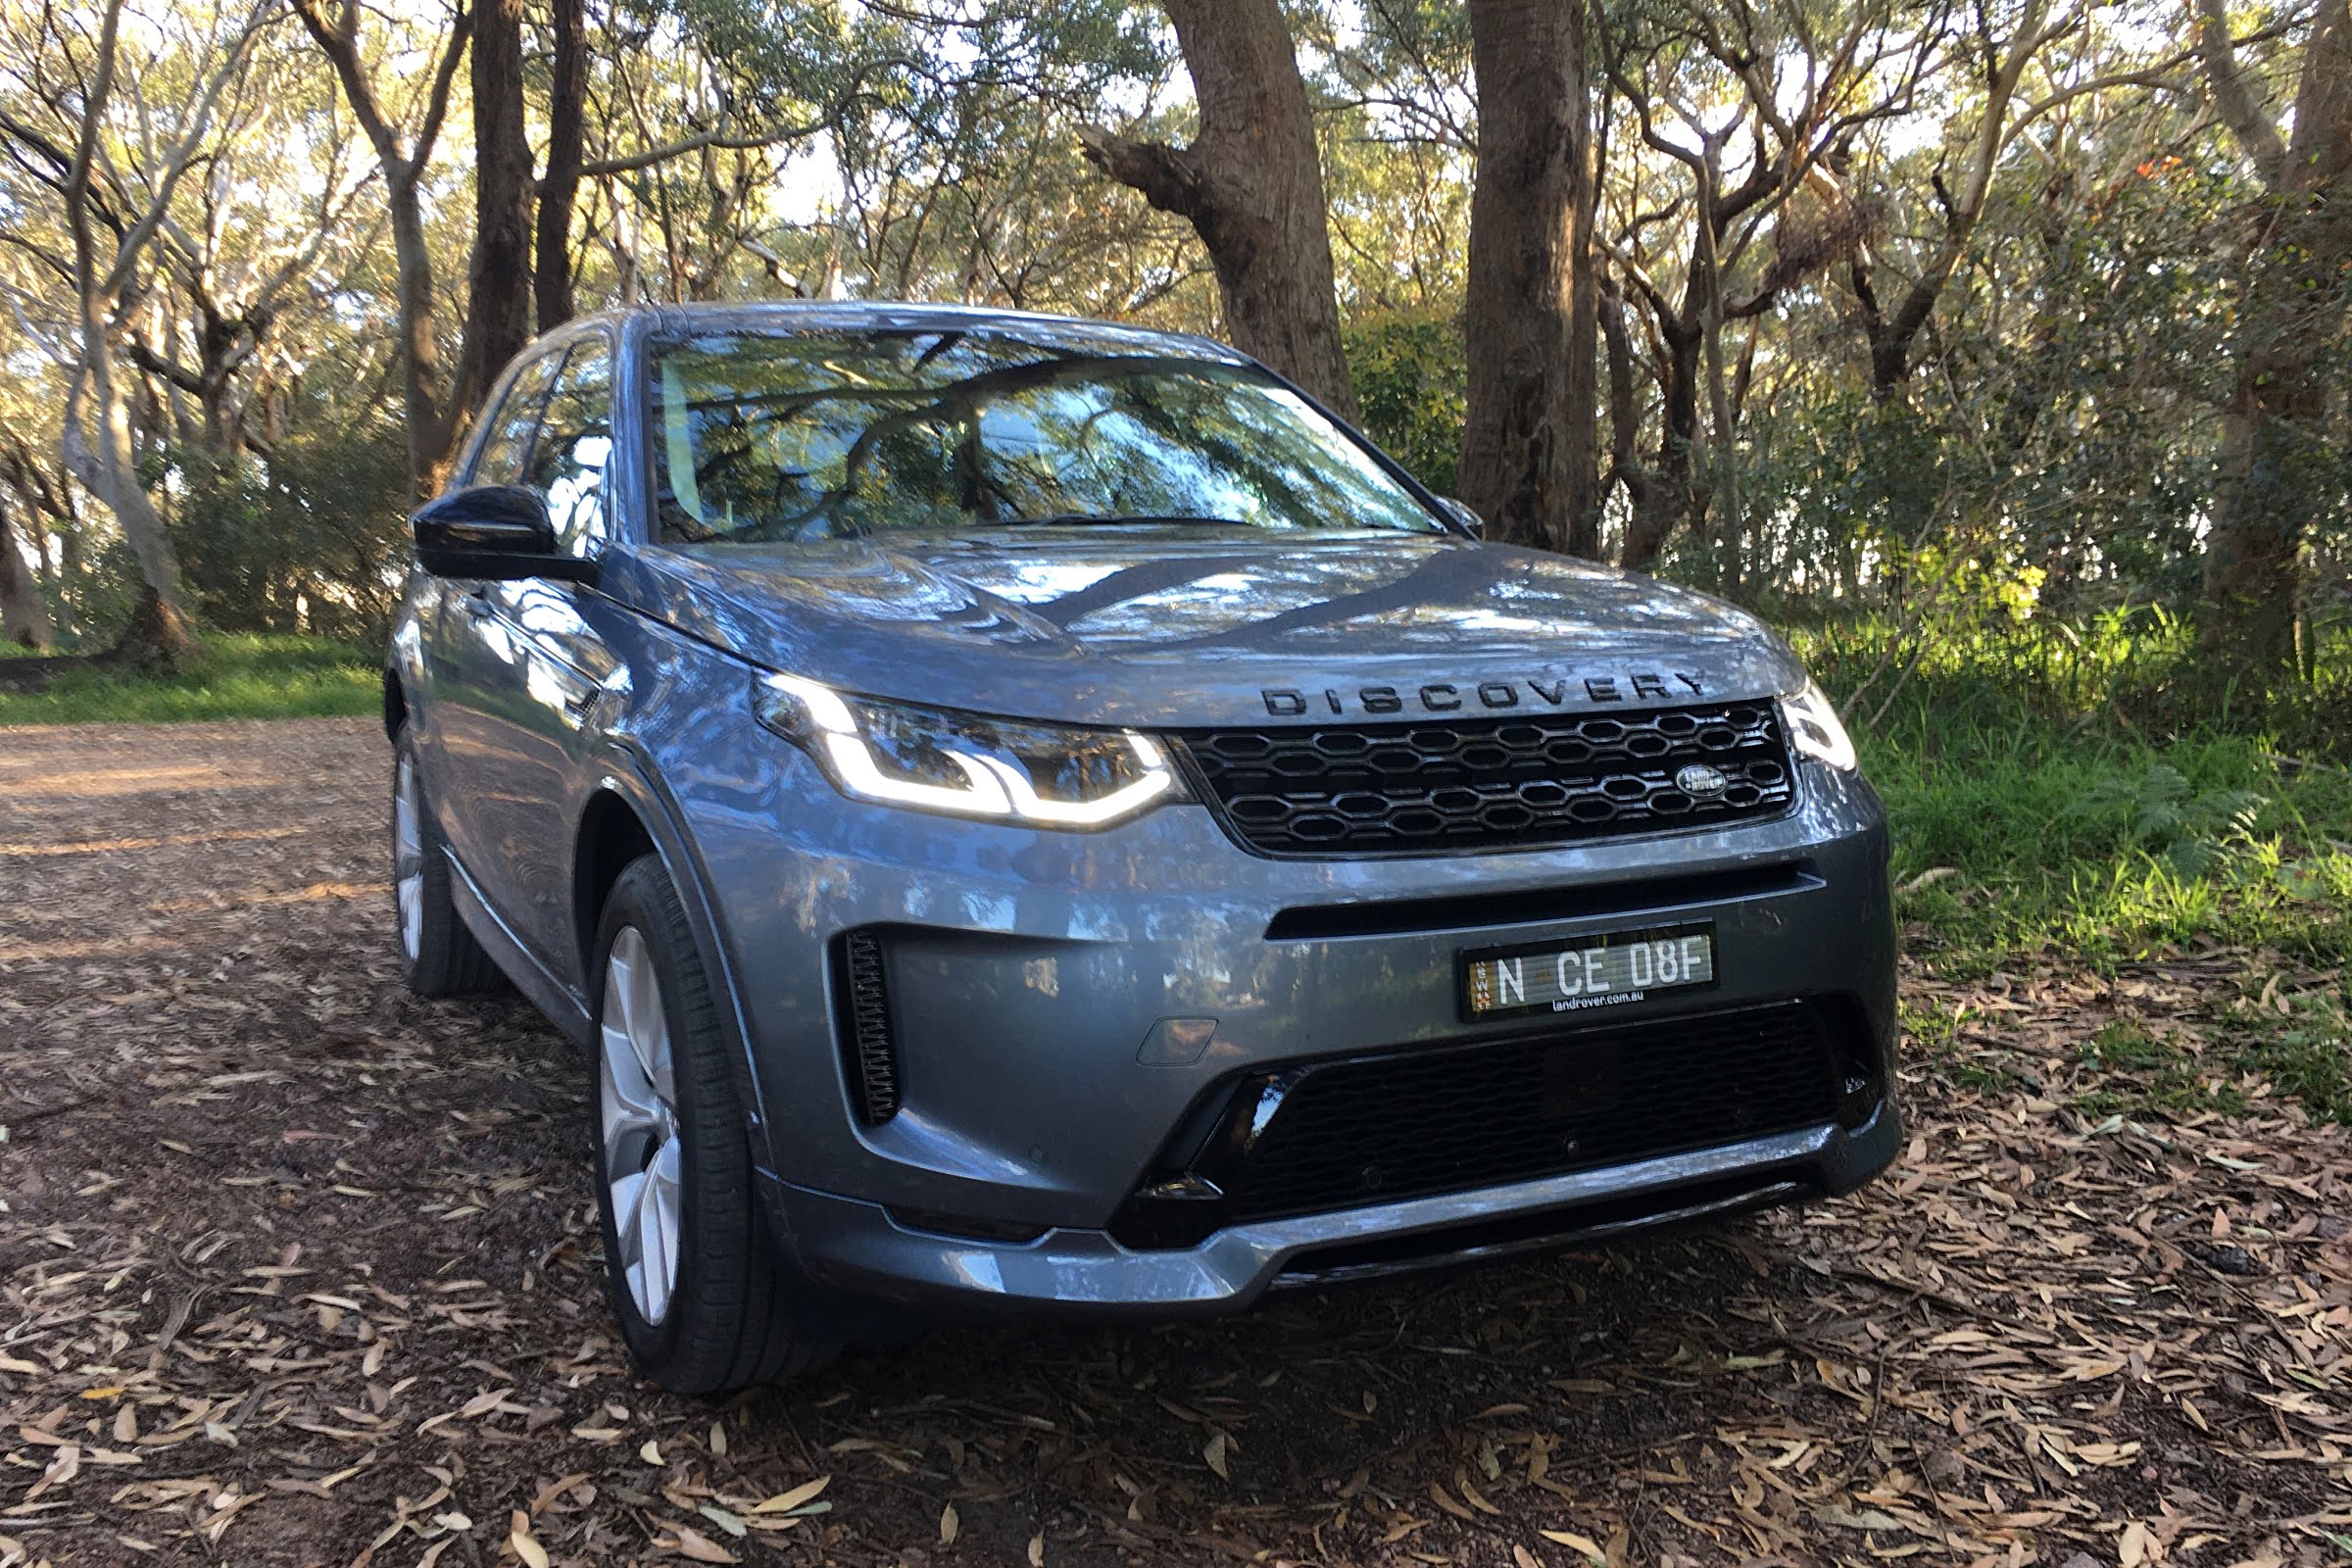 COTY LR Discovery Sport R Dynamic SE front profile